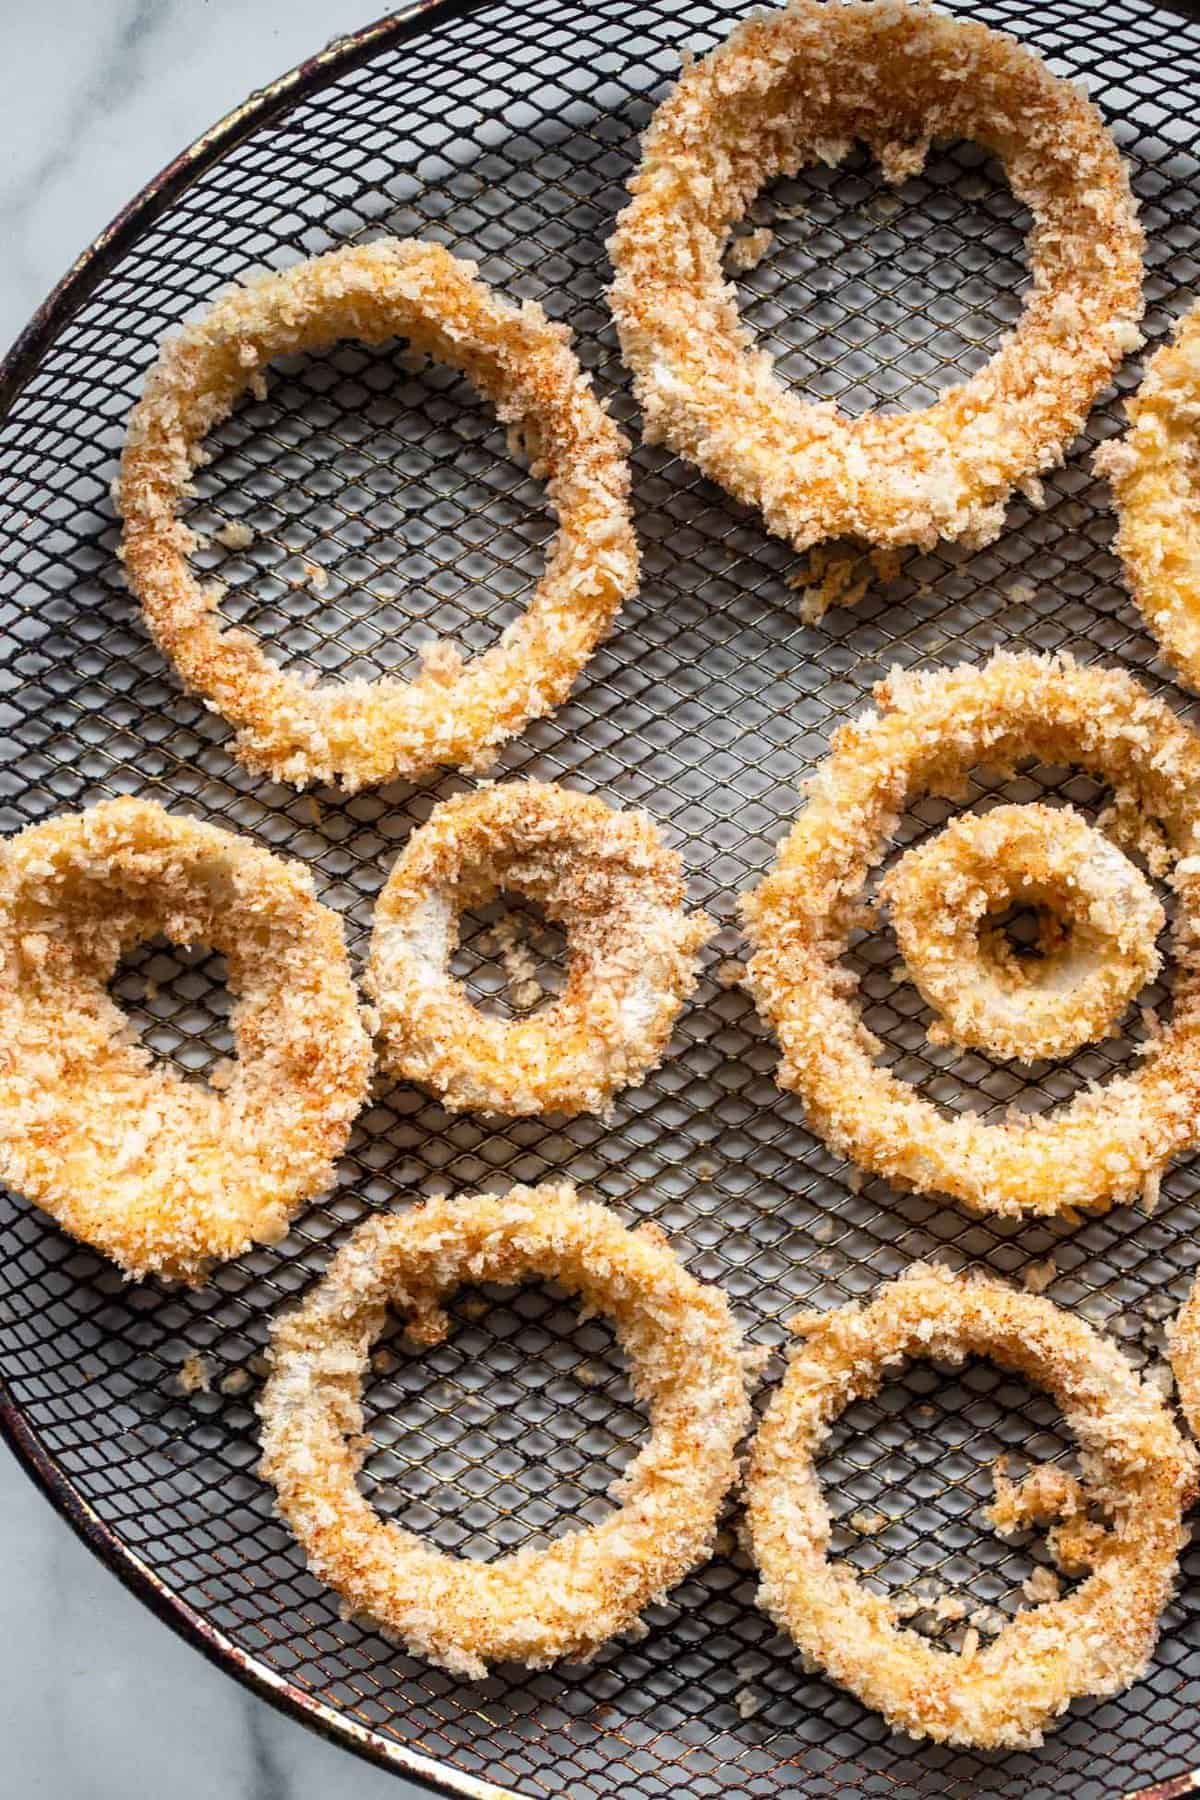 Onion rings air fryer on a mesh basket ready to be cooked